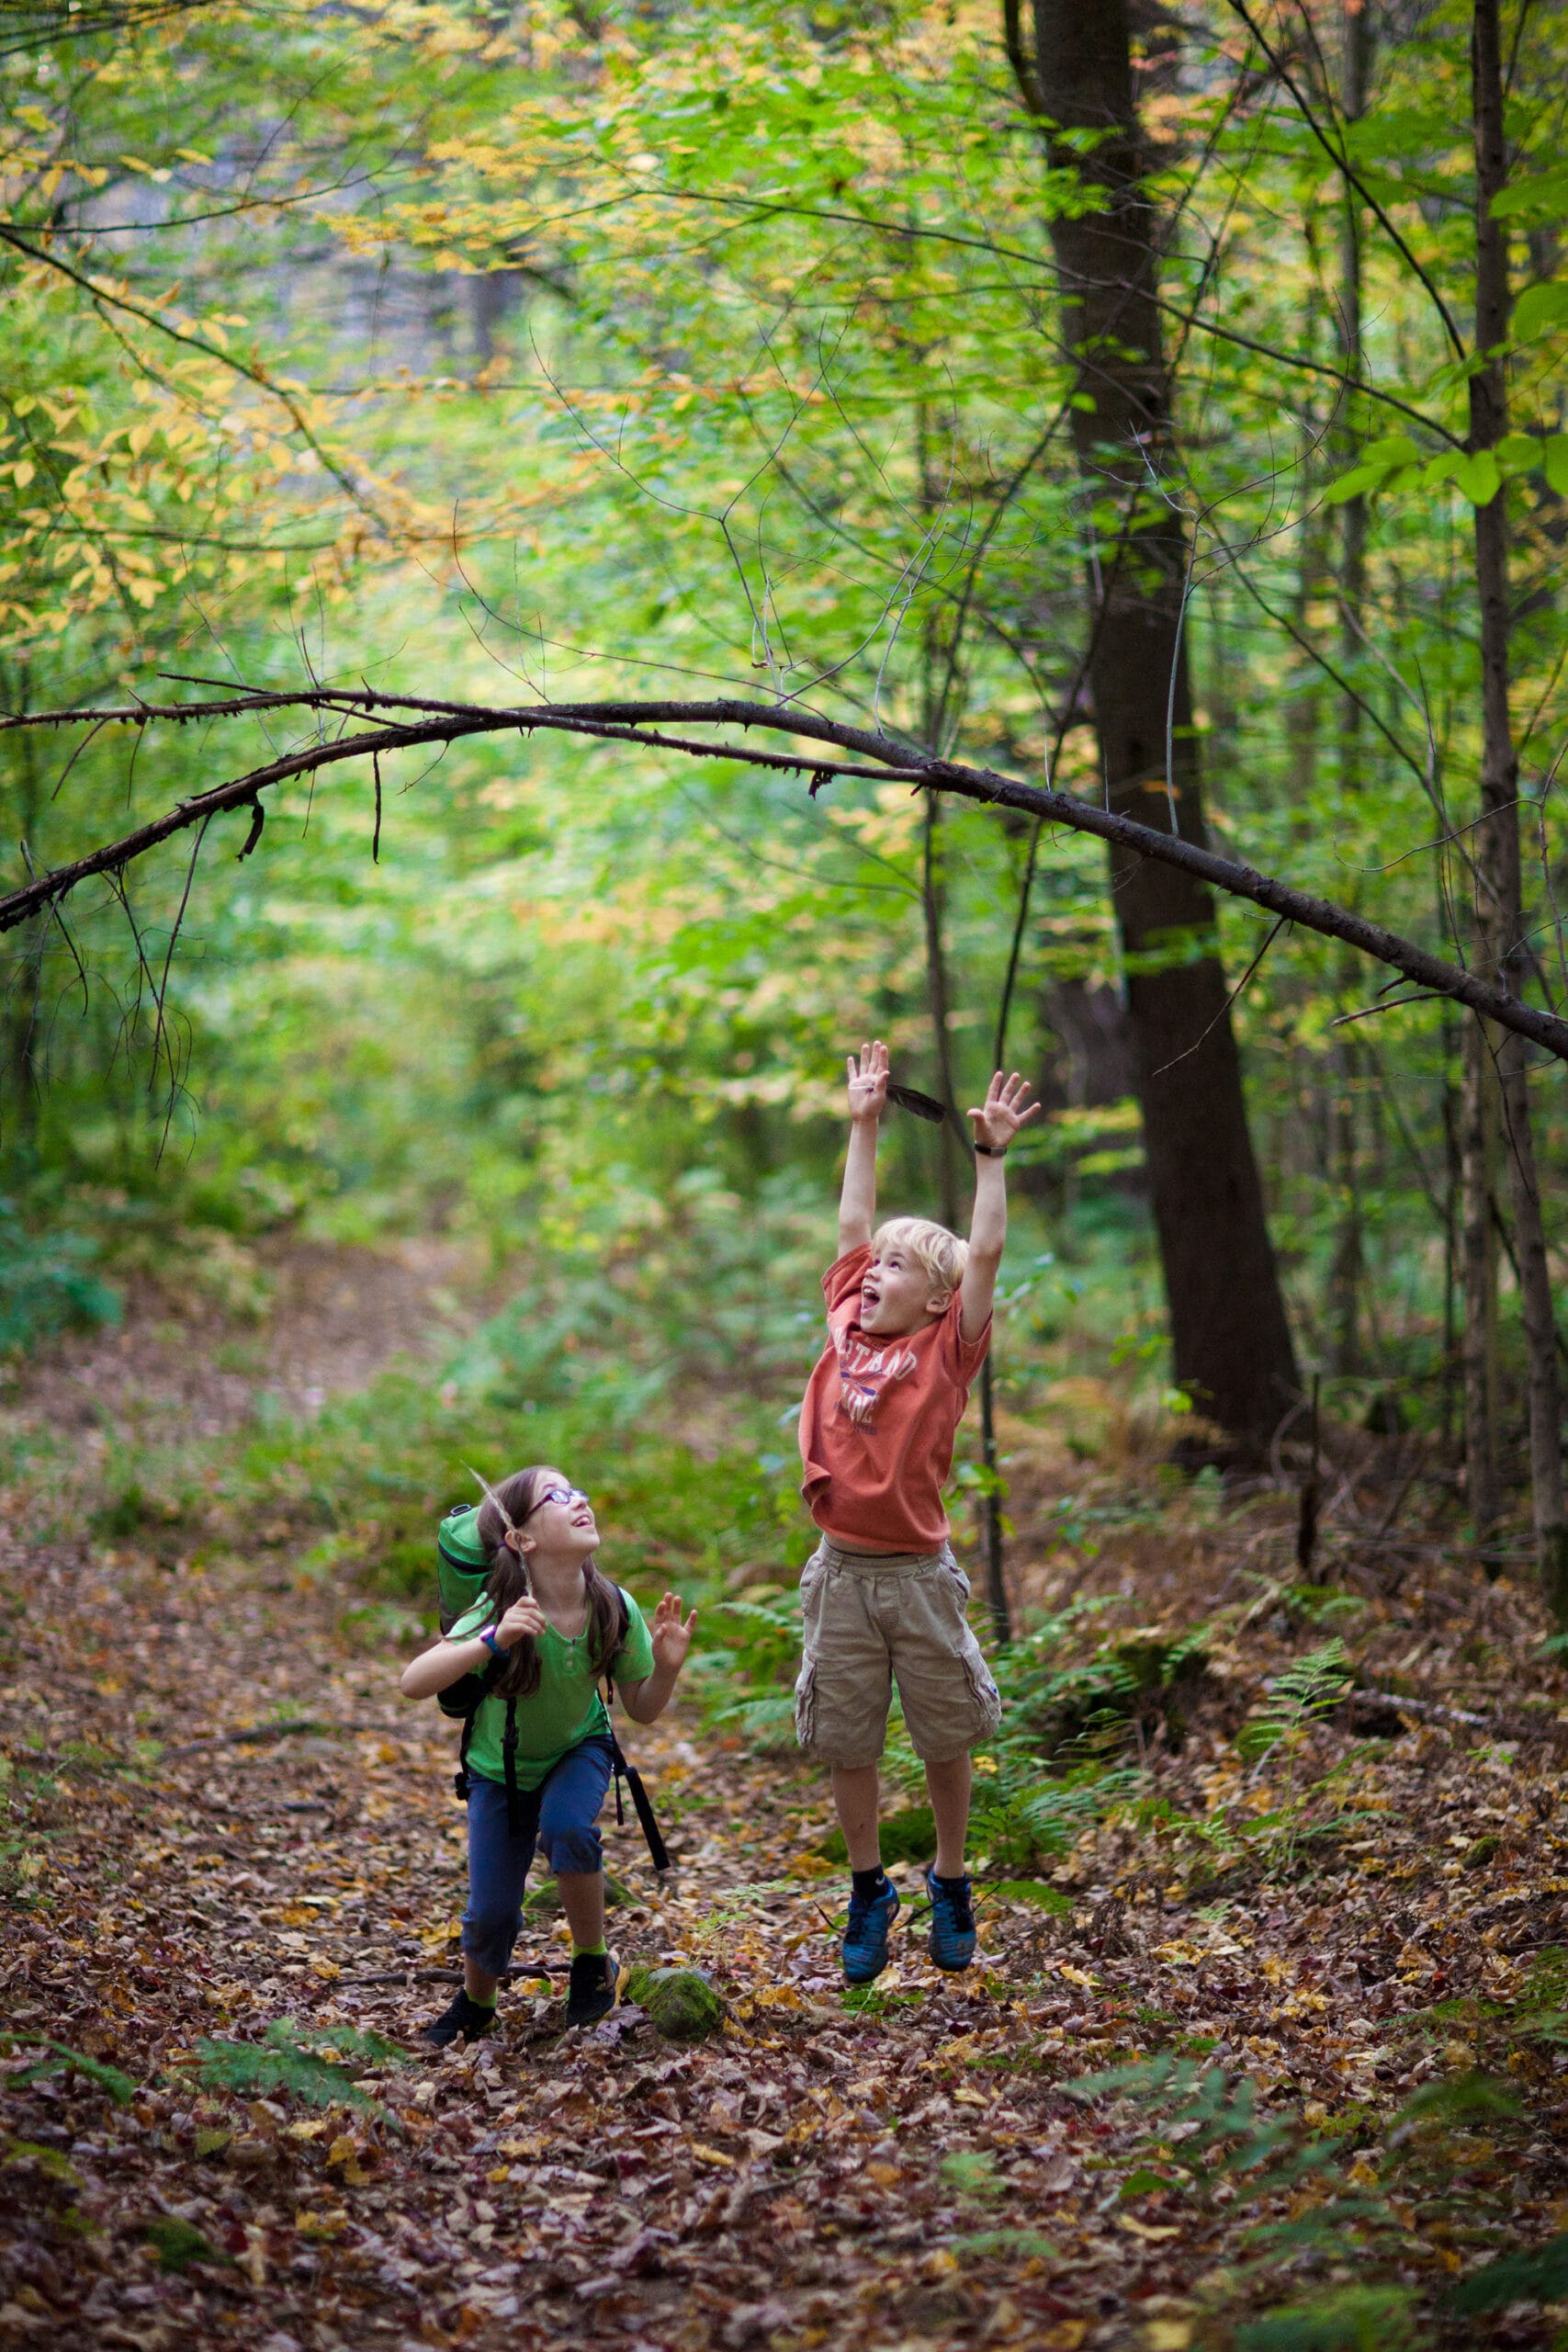 Two children are playing in a wooded area.